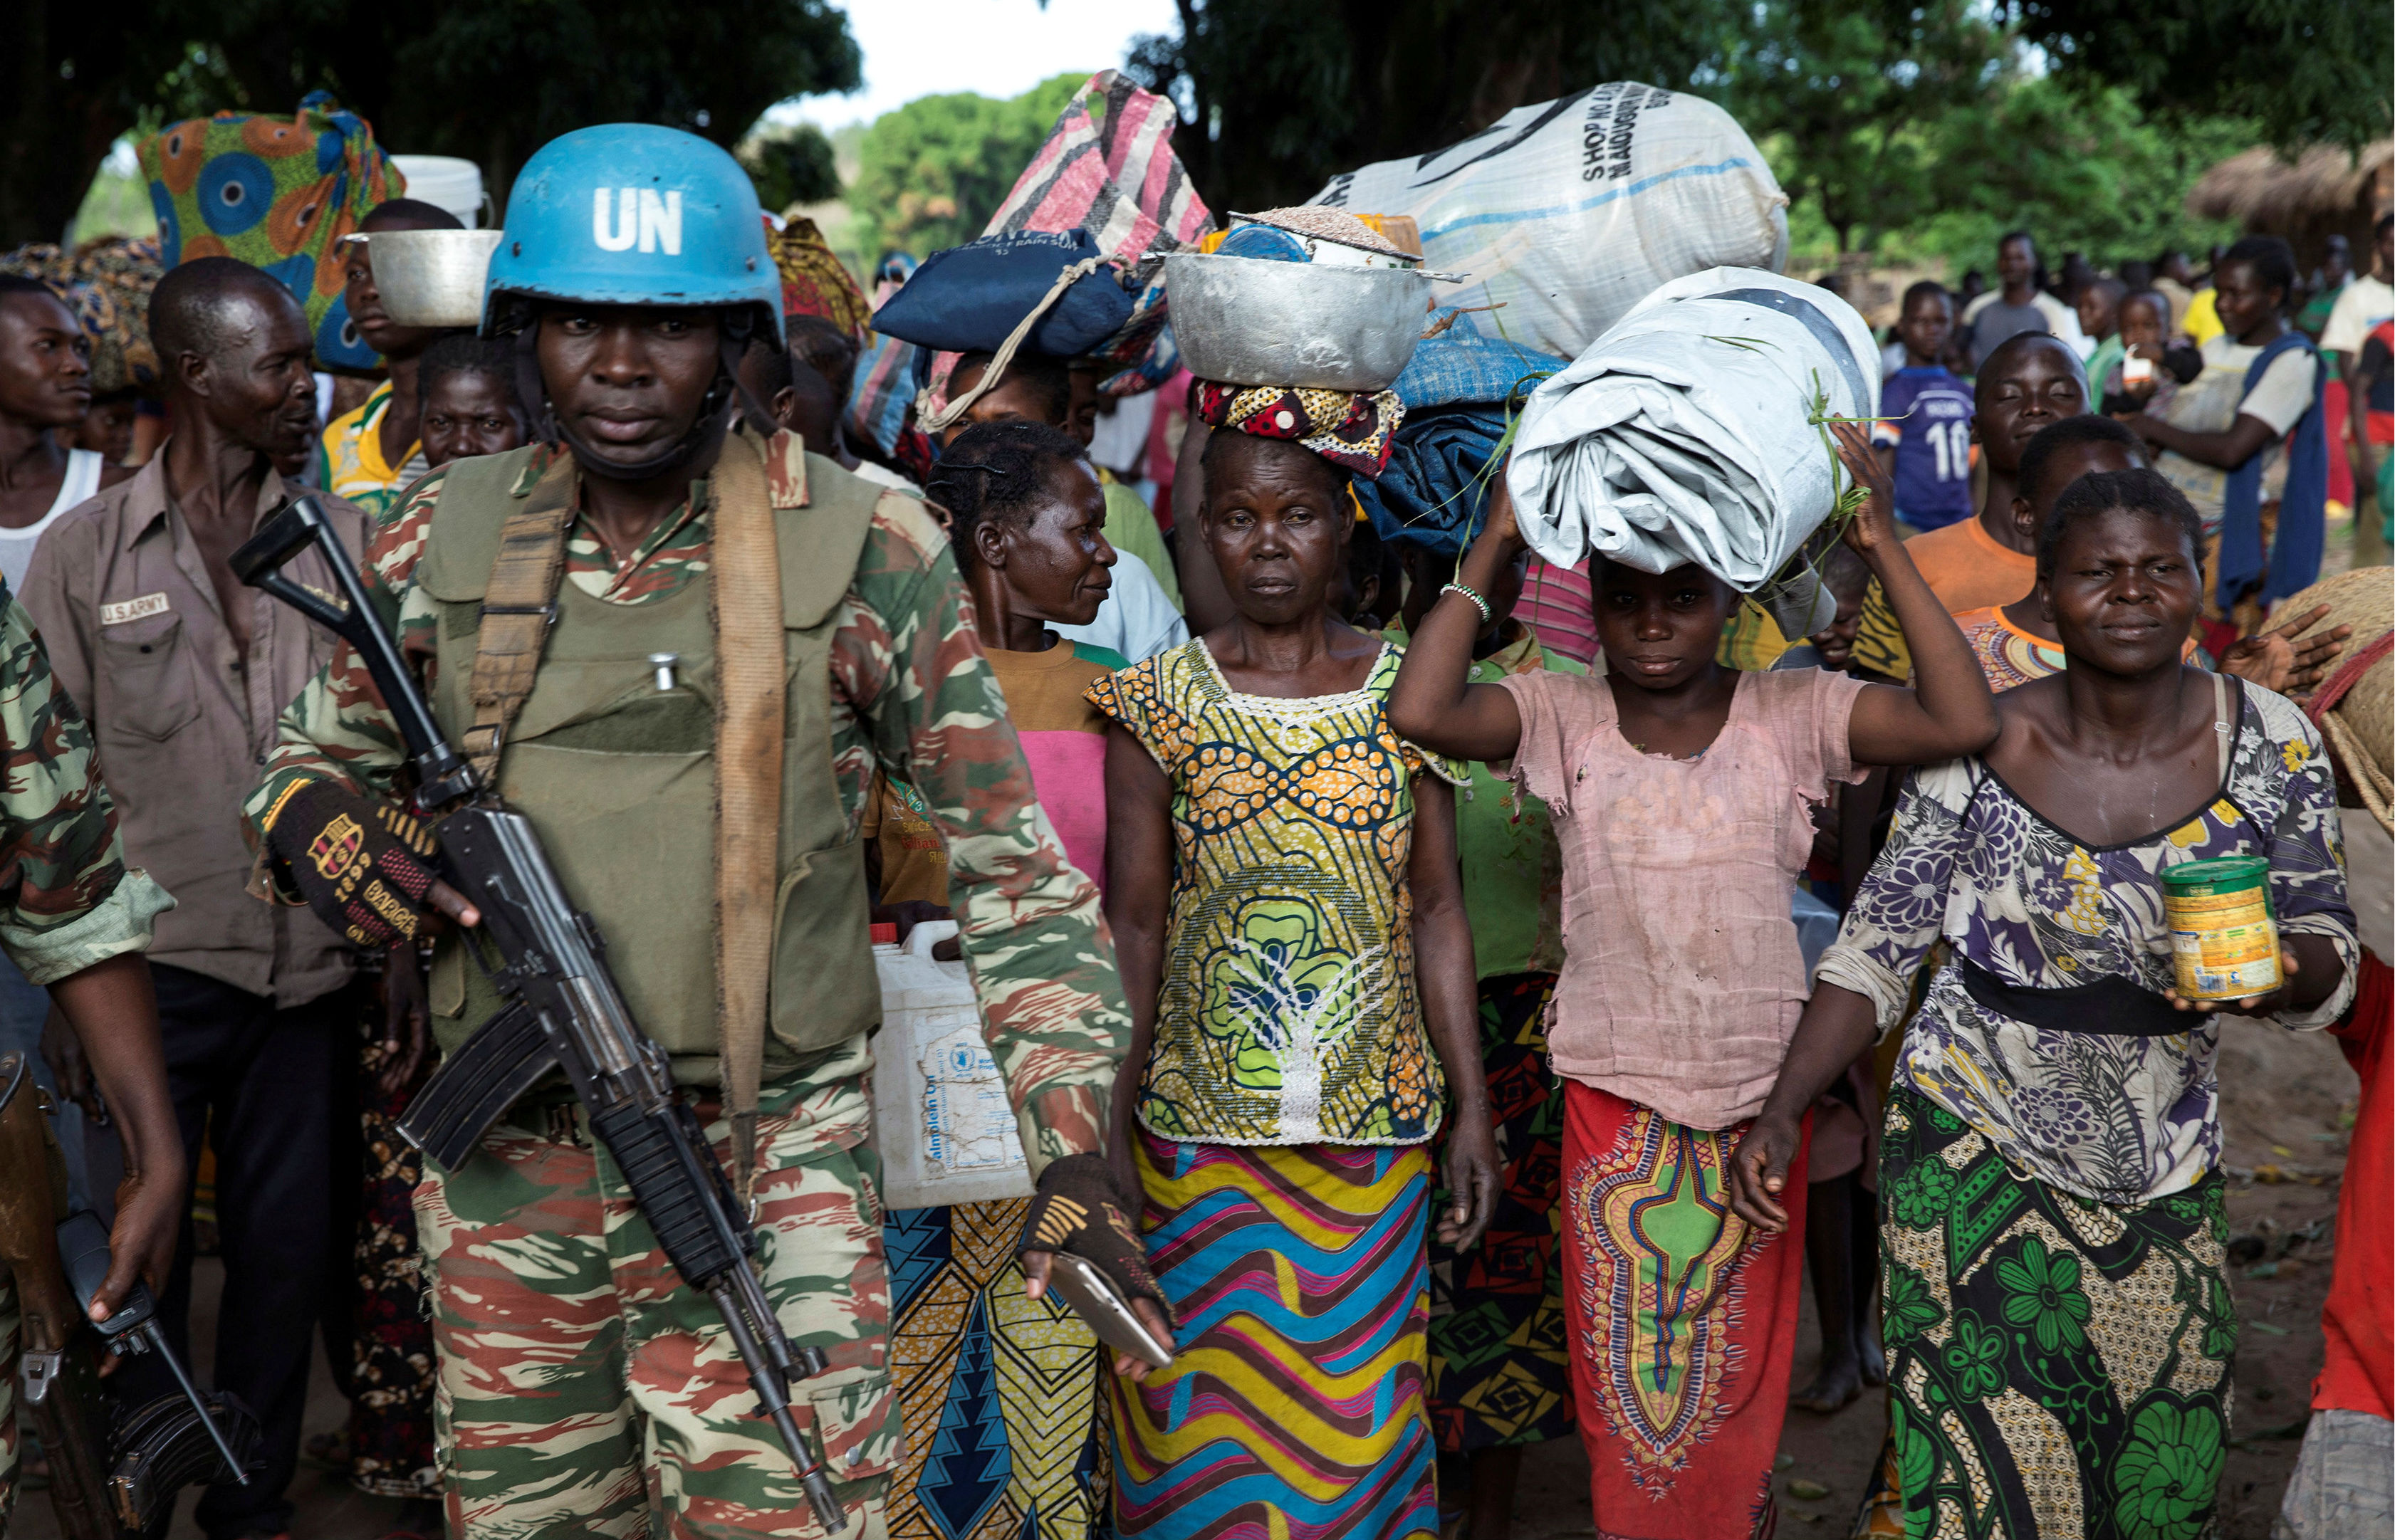 UN only 'half fulfilled its role' as refugees left to 'sad fate', says Central African bishop 